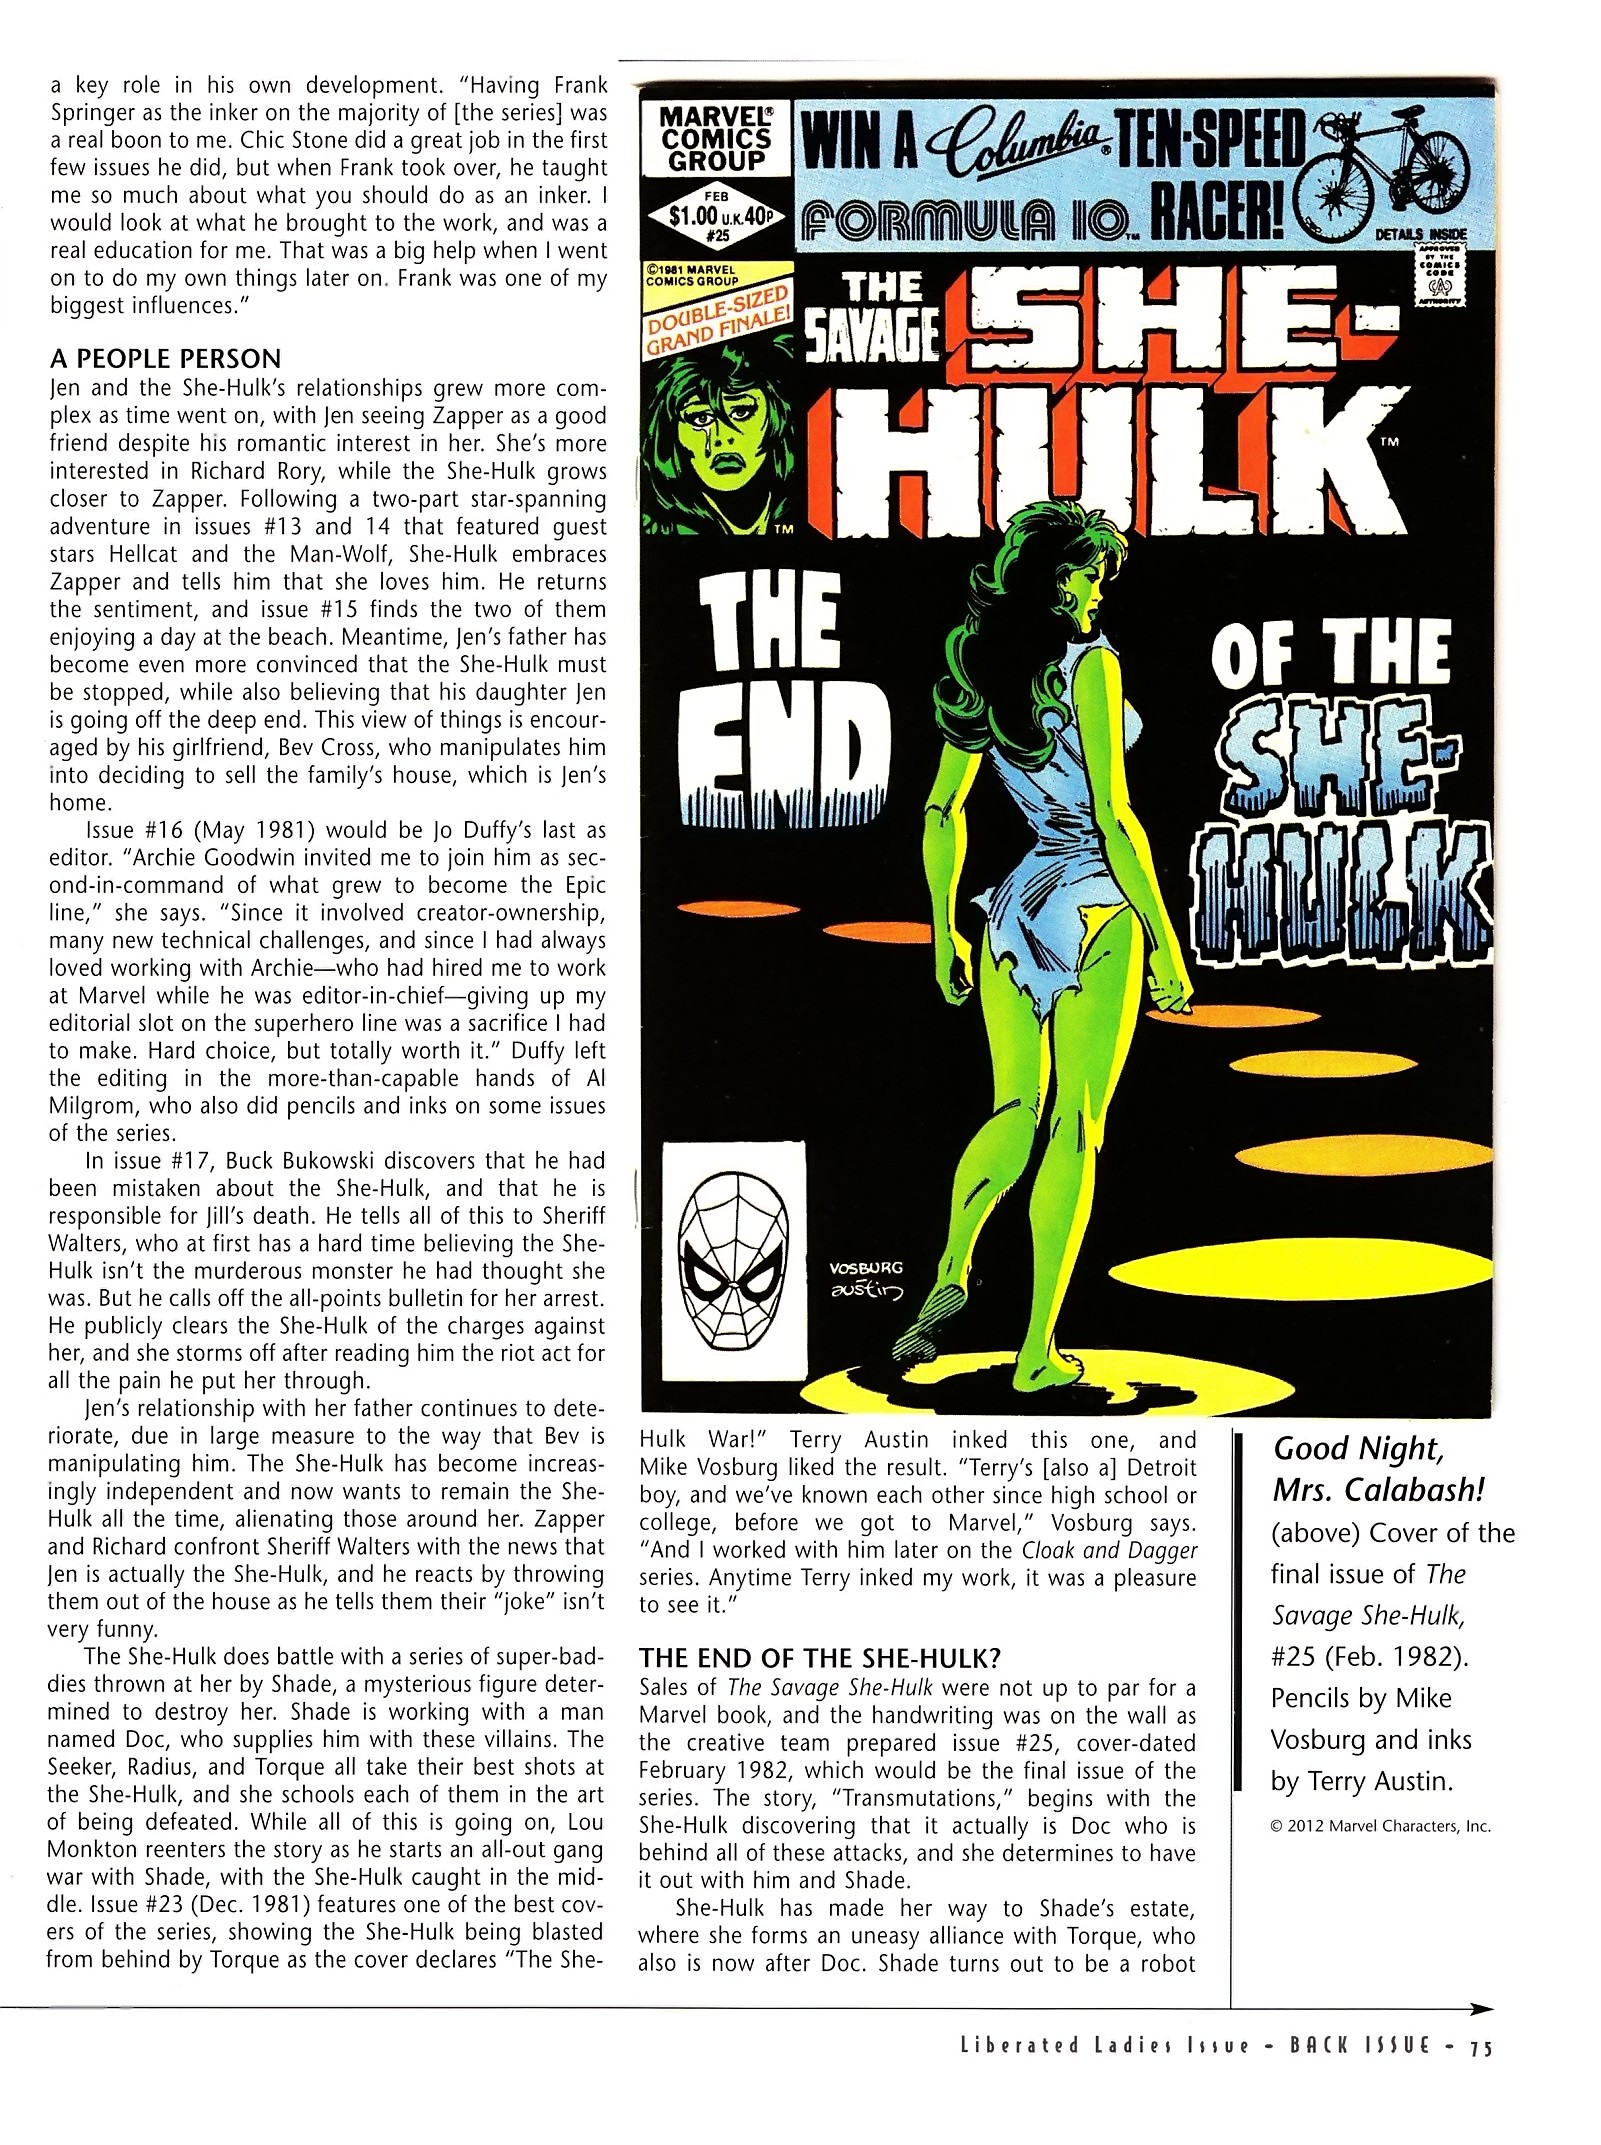 Read online Back Issue comic -  Issue #54 - 74